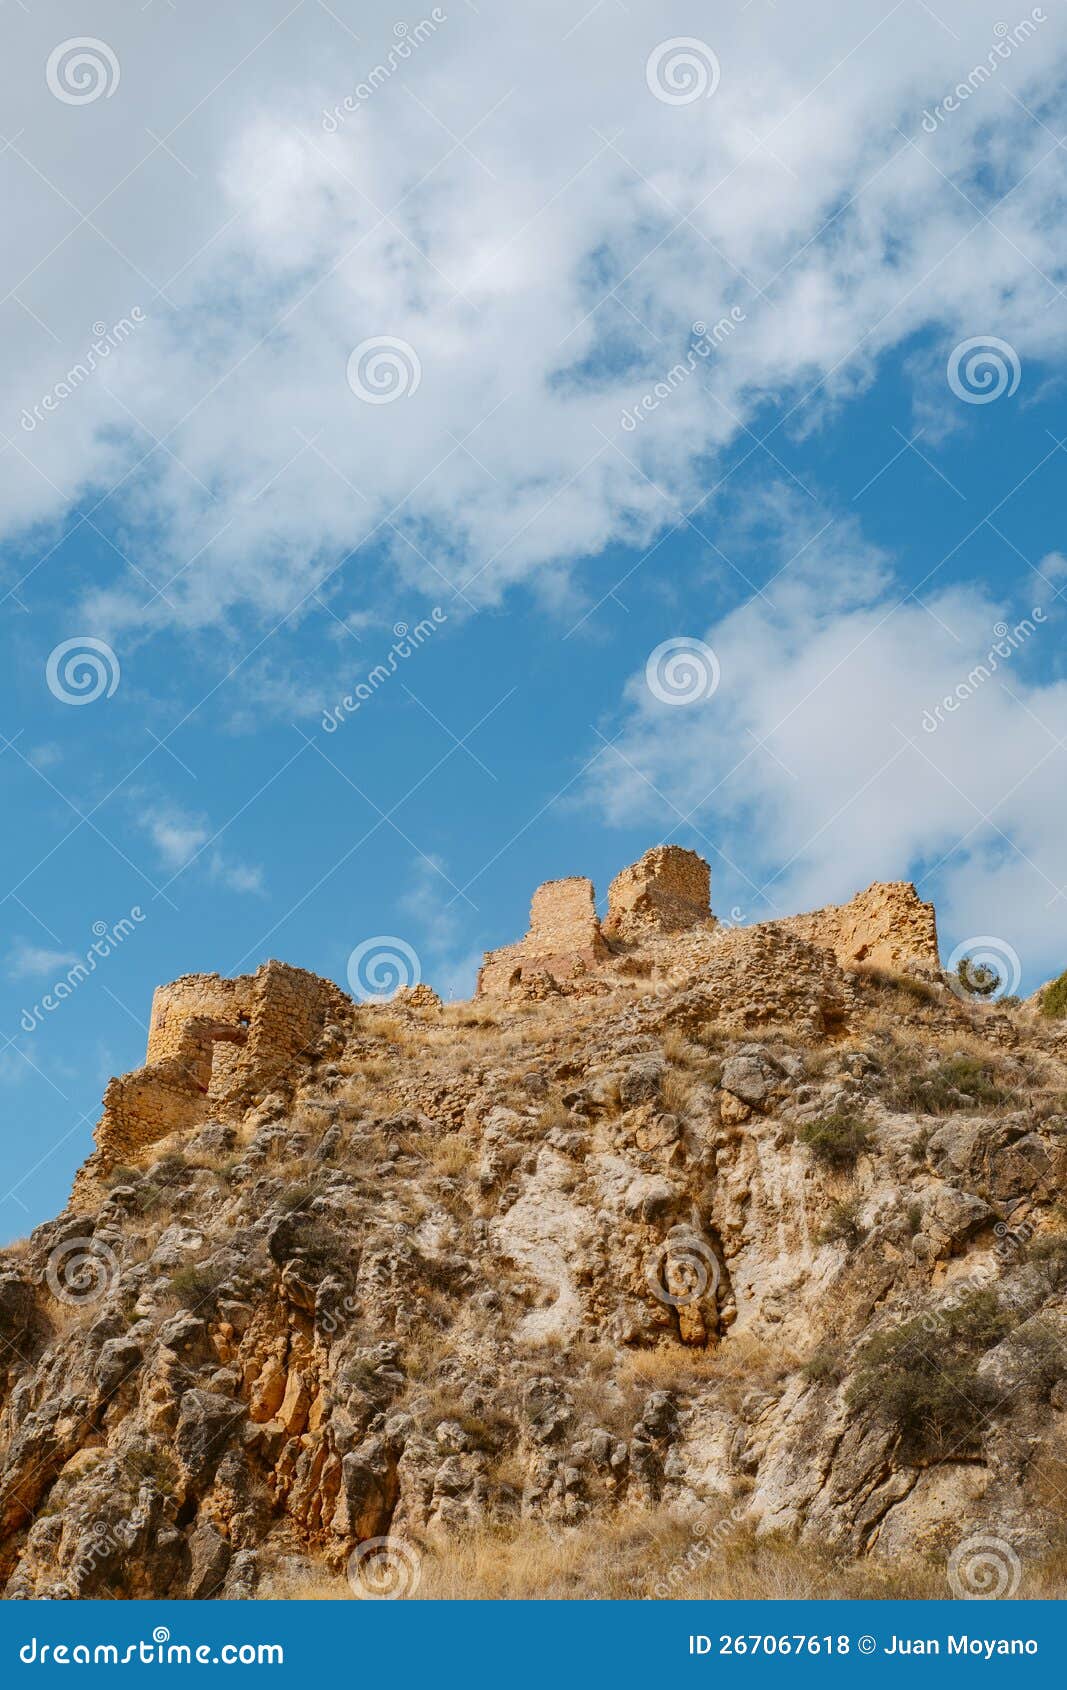 remains of the santa croche castle, in spain